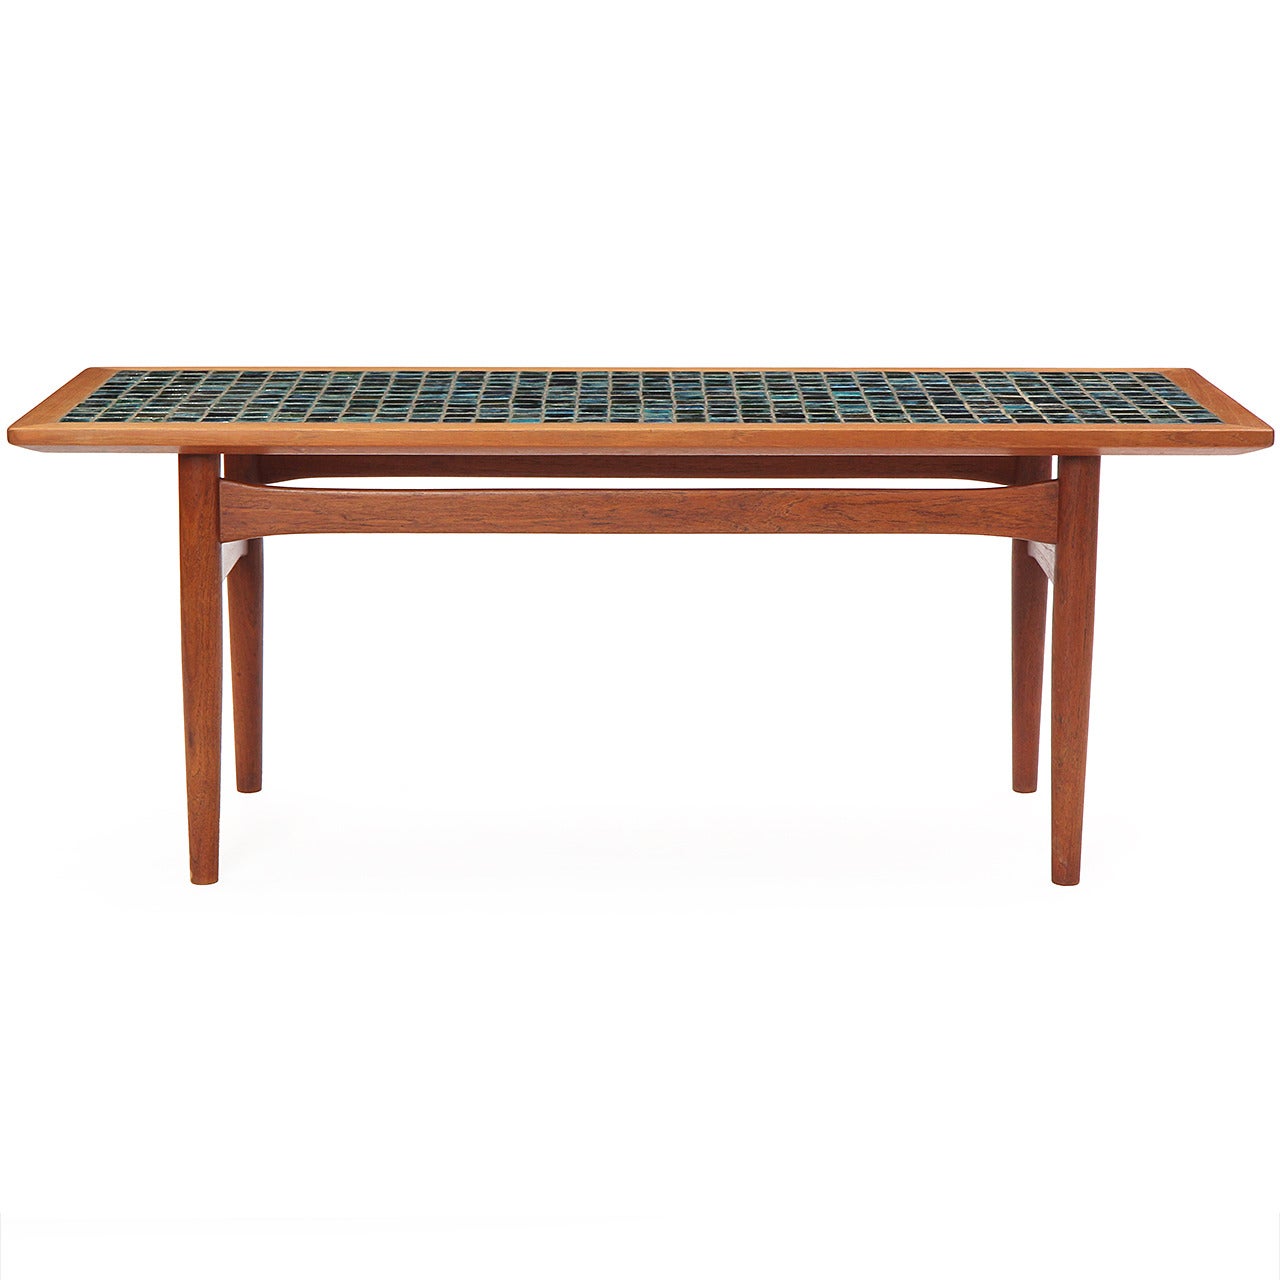 Danish Tile-Topped Table